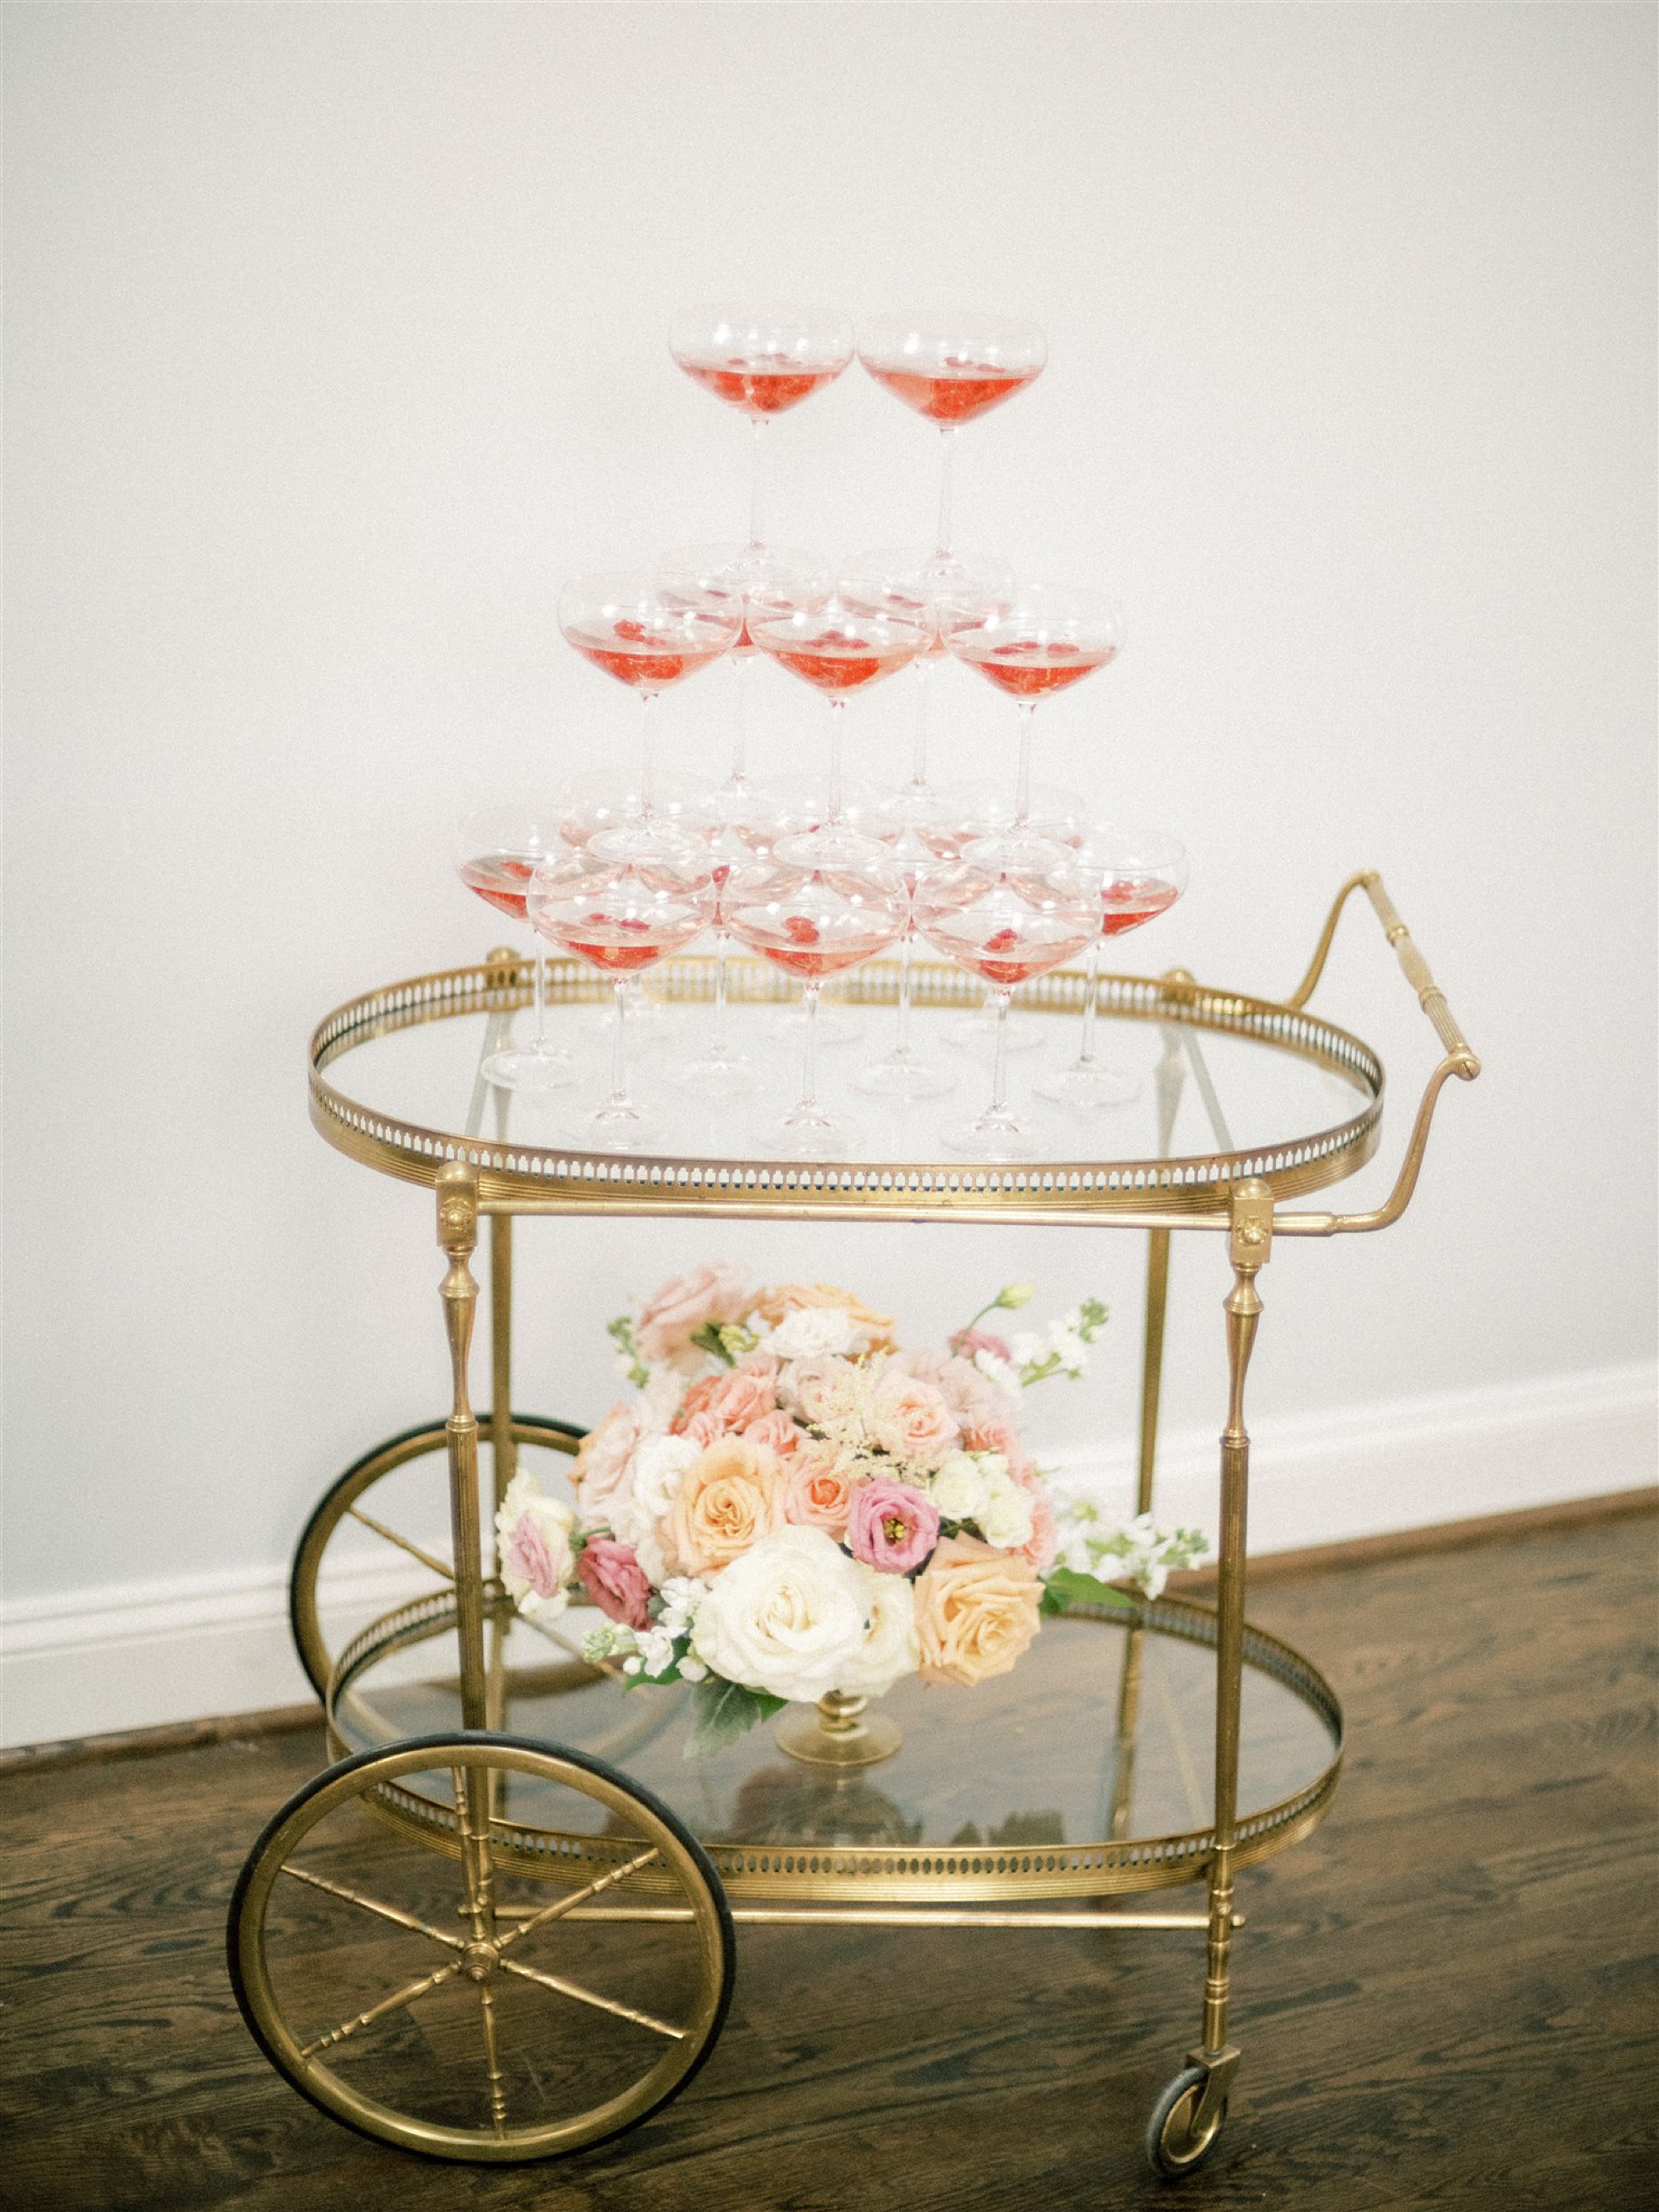 rose champagne tower on vintage tray